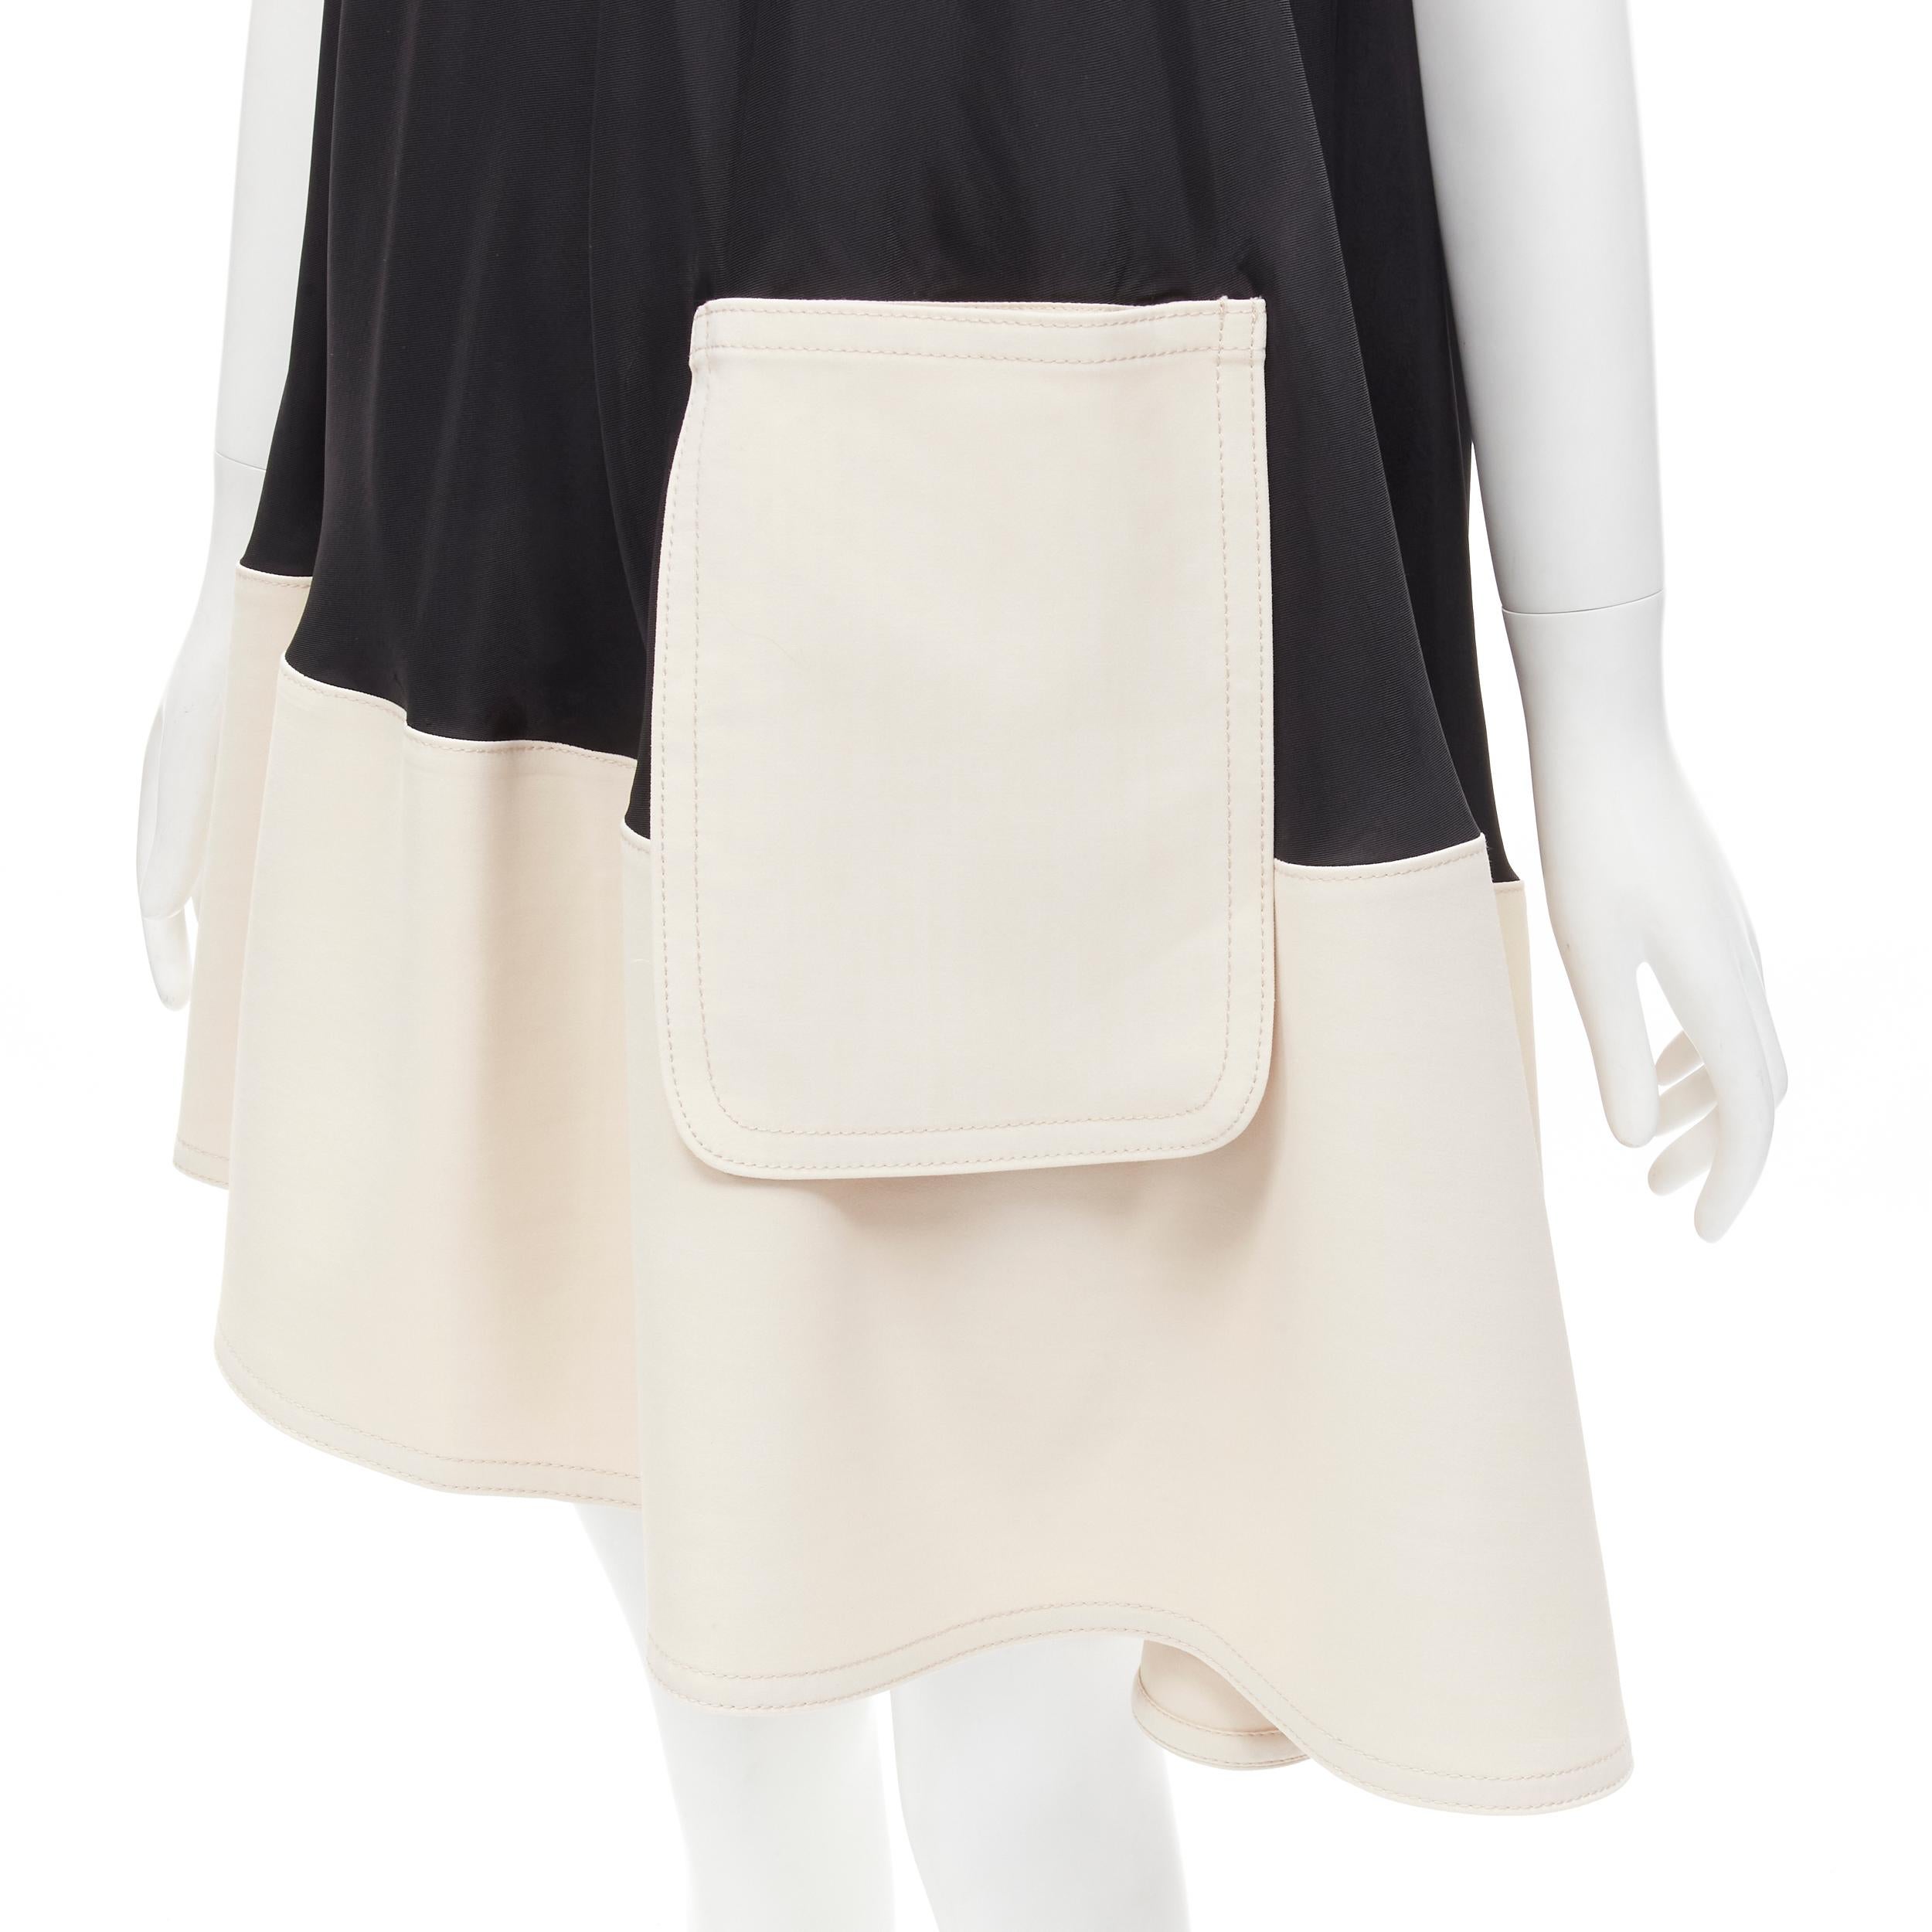 TIBI black beige polyester patch pocket buckle halter A-line dress US2 S
Brand: Tibi
Material: Polyester
Color: Black
Pattern: Solid
Extra Detail: Elasticated buckle halter collar. Patch pocket design. Weighted cotton at hem for structure.
Made in: